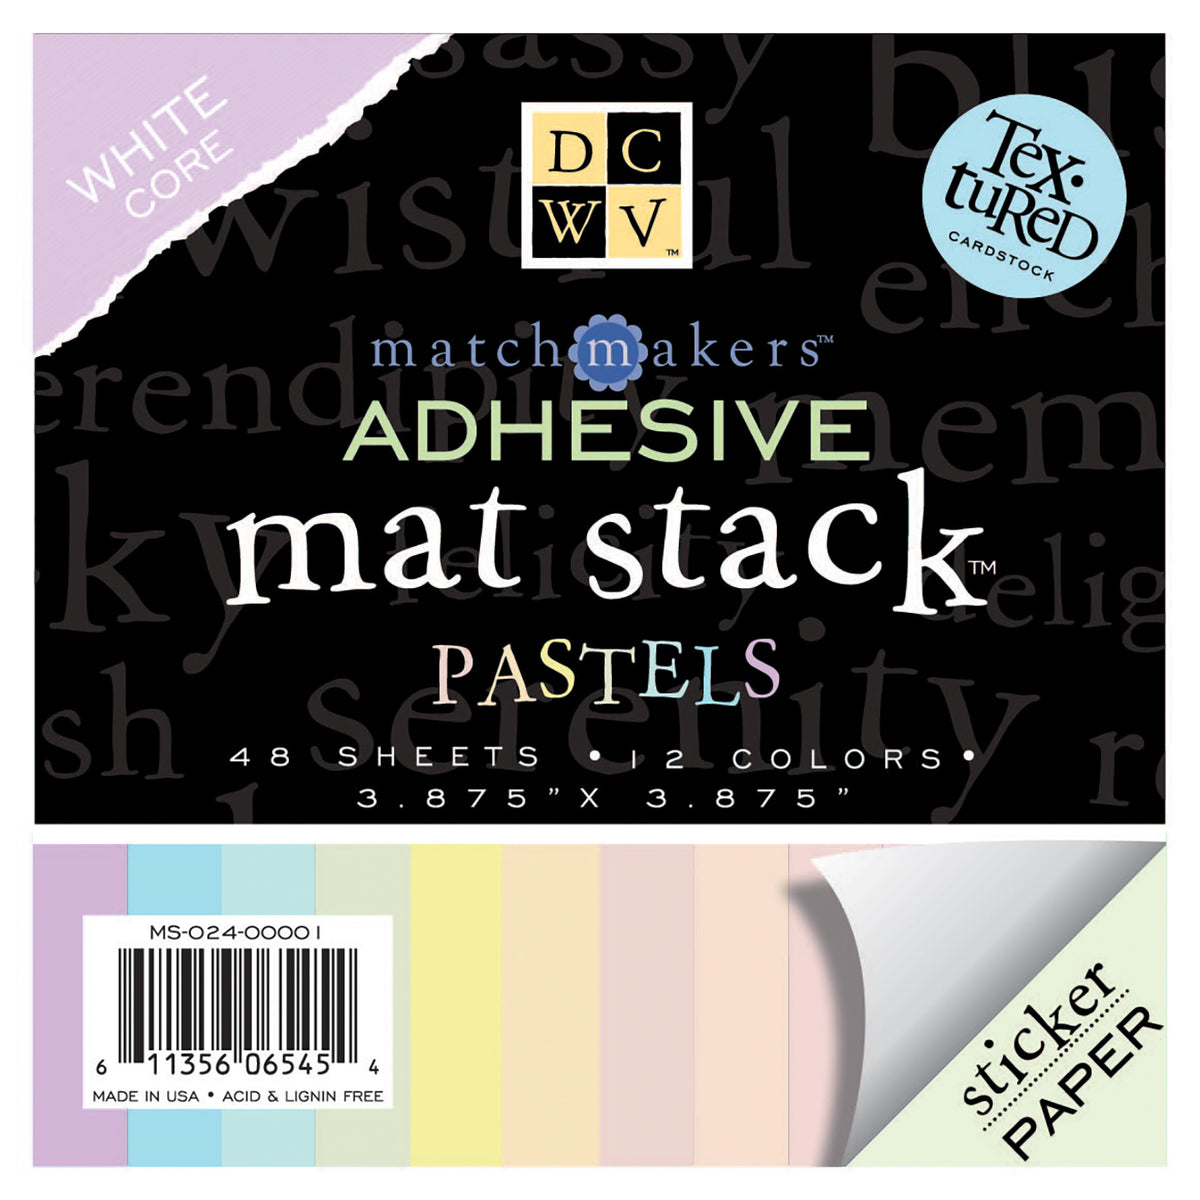 DCWV Mat Stacks Textured Adhesive Pastels 3.875 Square Sticker Paper - 24 sheets